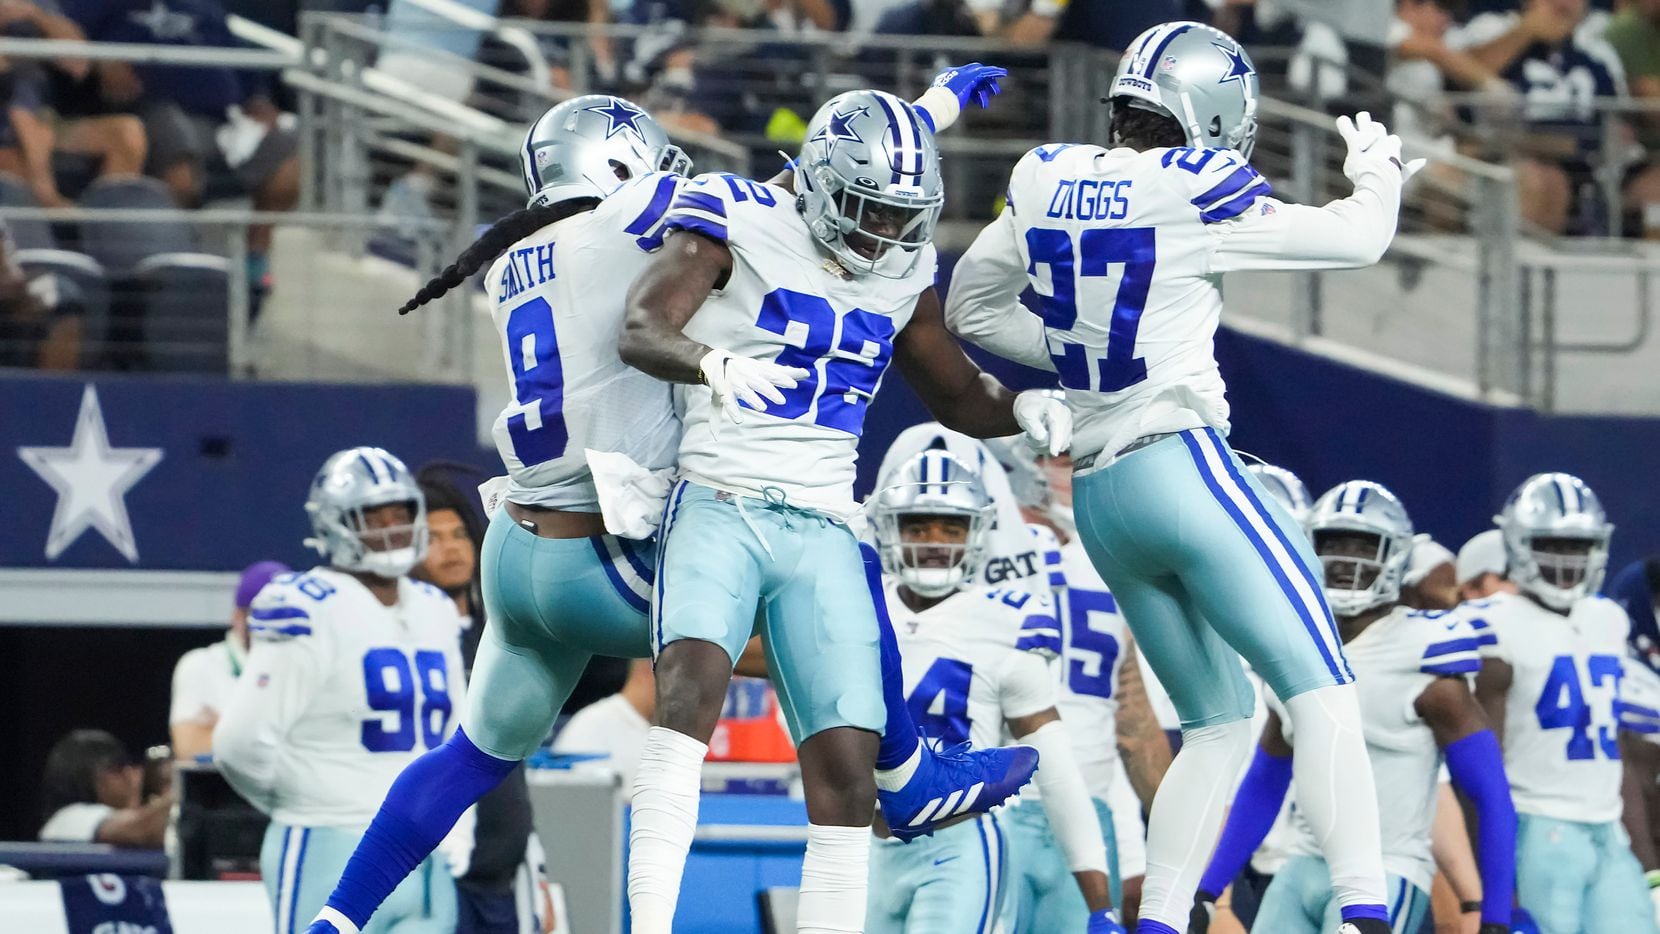 Dallas Cowboys safety Jayron Kearse (32) celebrates a defensive stop with linebacker Jaylon Smith (9) ad cornerback Trevon Diggs (27) during the first half of a preseason NFL football game against the Houston Texans at AT&T Stadium on Saturday, Aug. 21, 2021, in Arlington. 